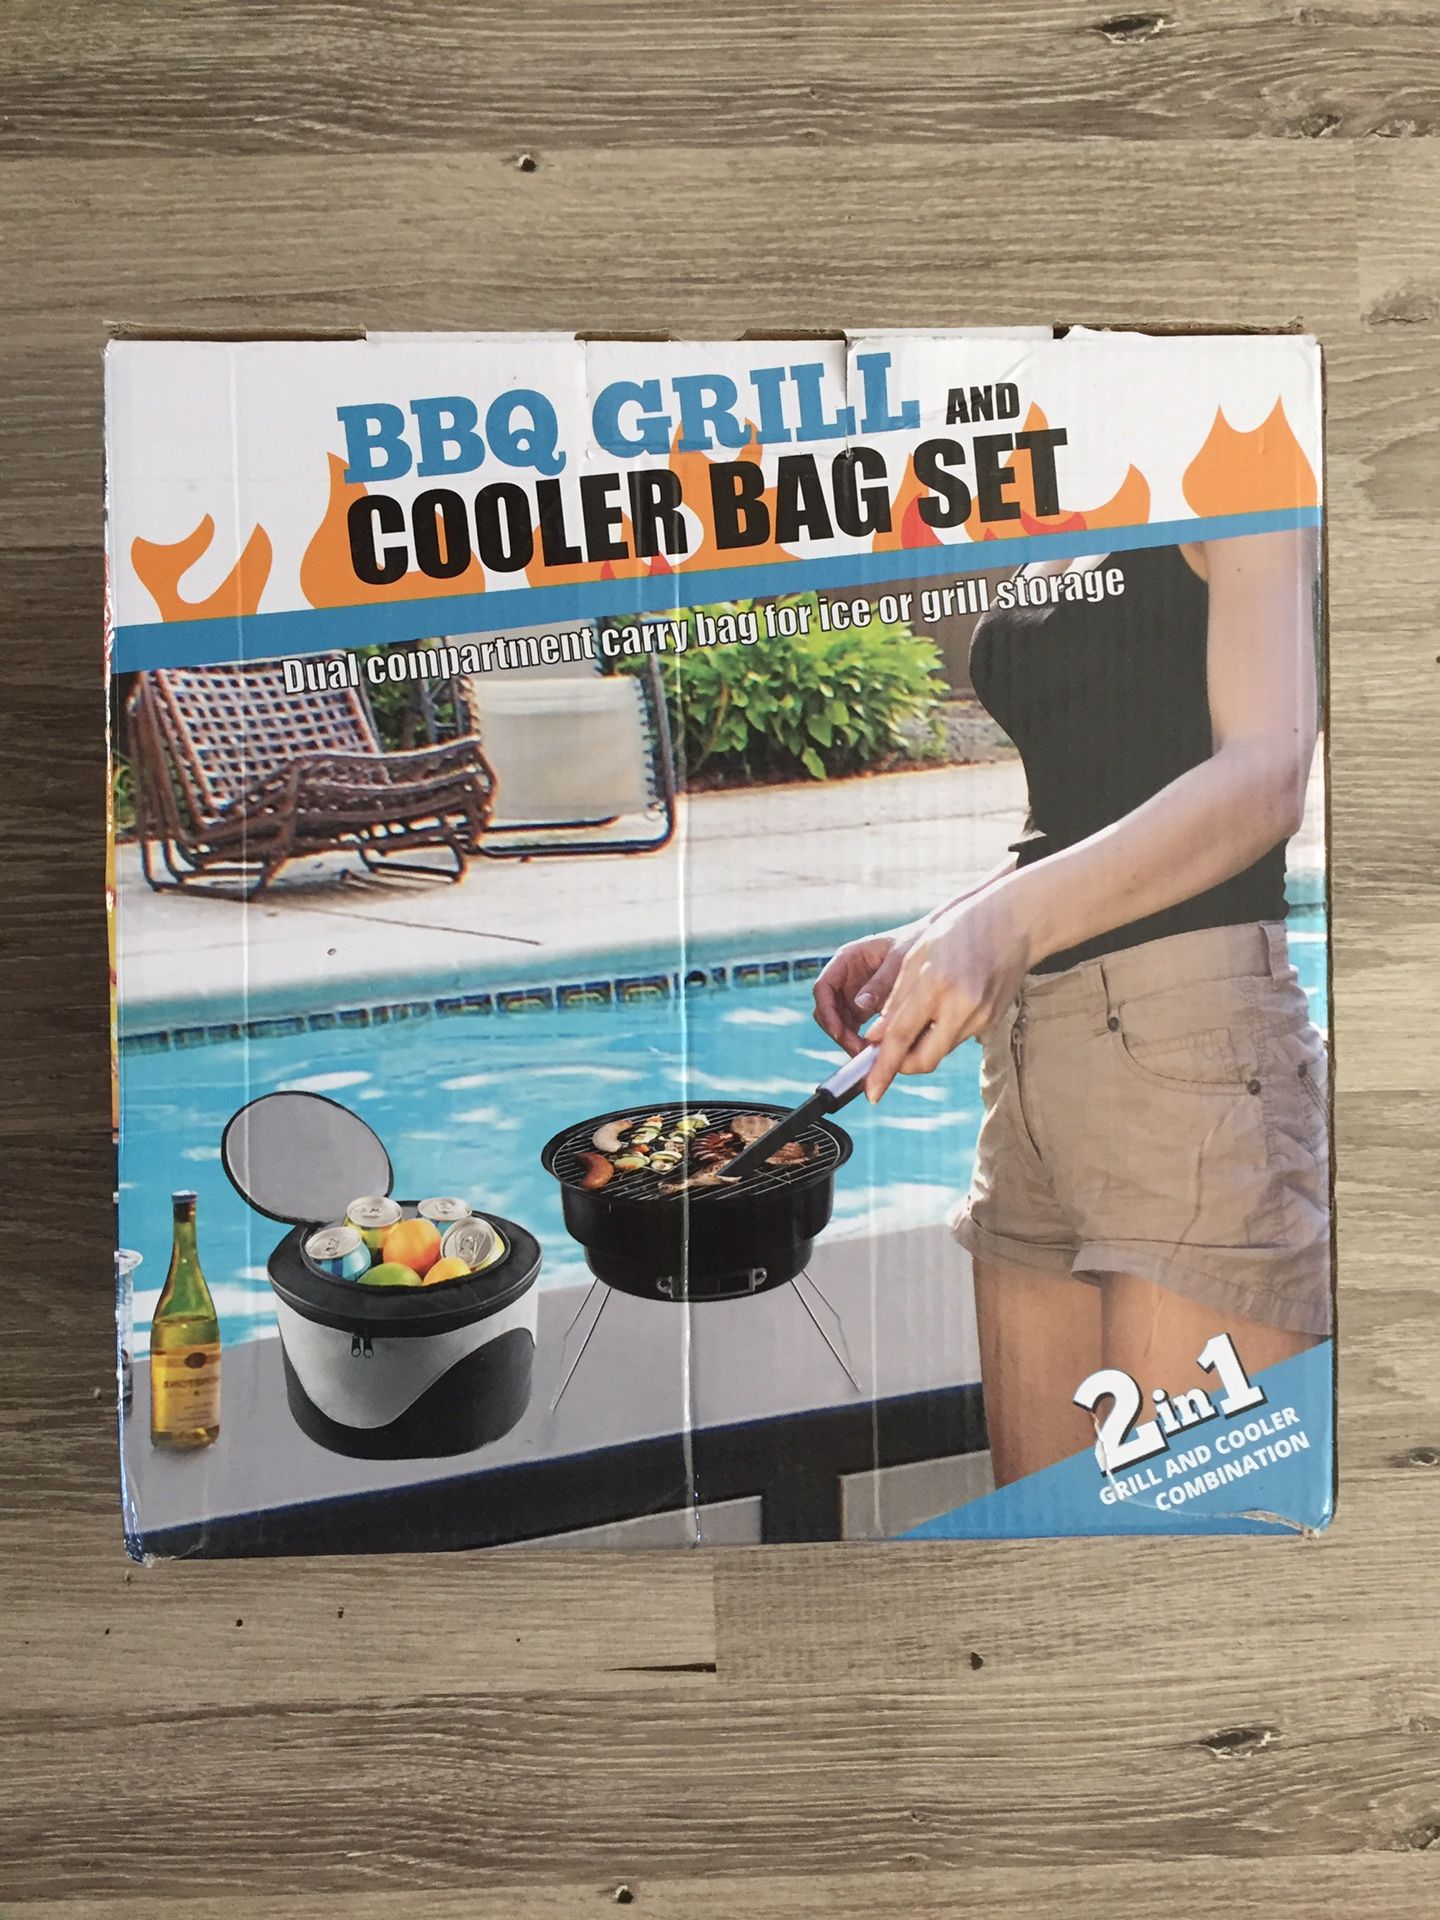 BBQ Grill and cooler bag set